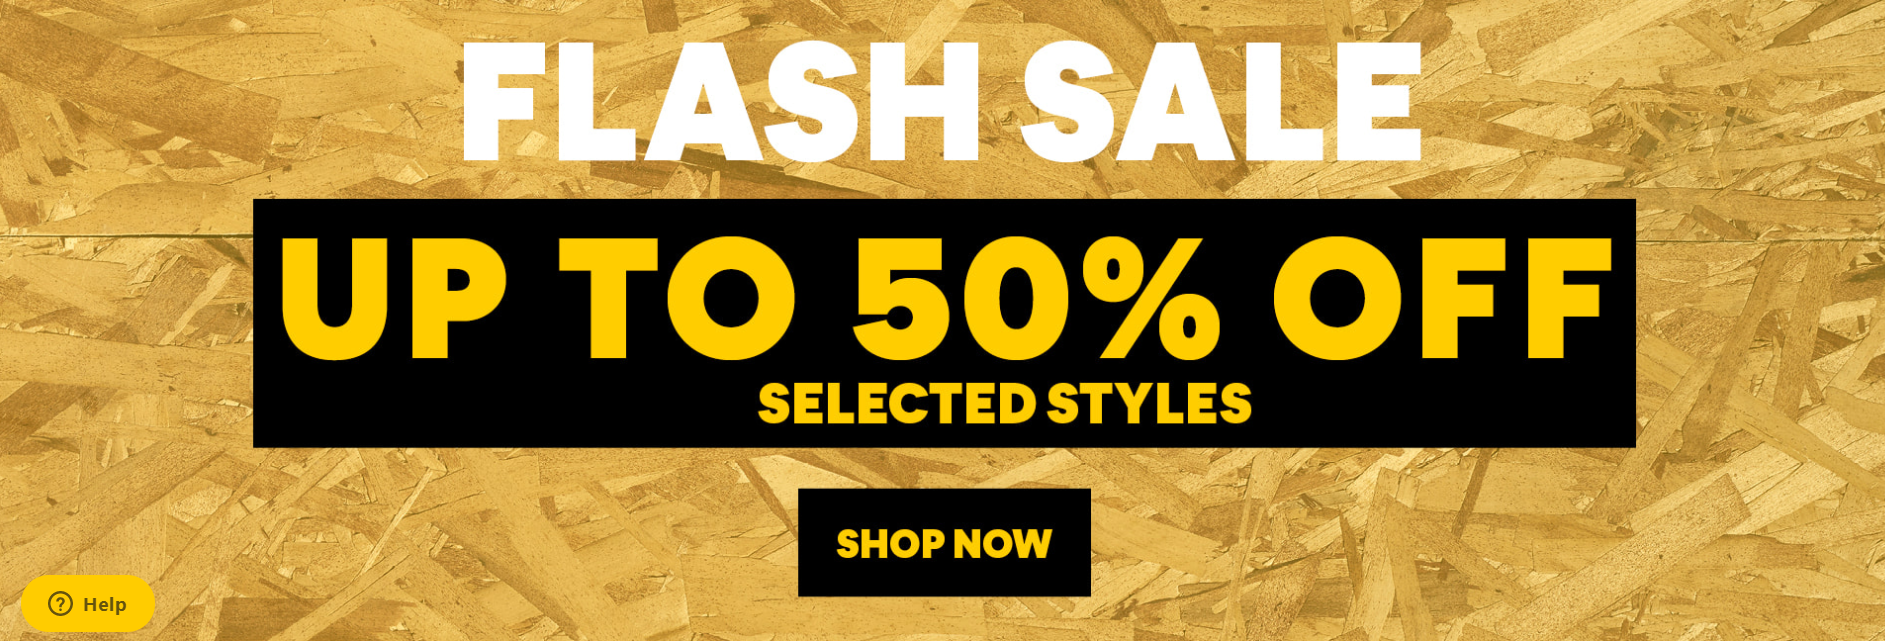 Cat Workwear Flash sale up to 50% OFF on selected styles including shoes & clothing